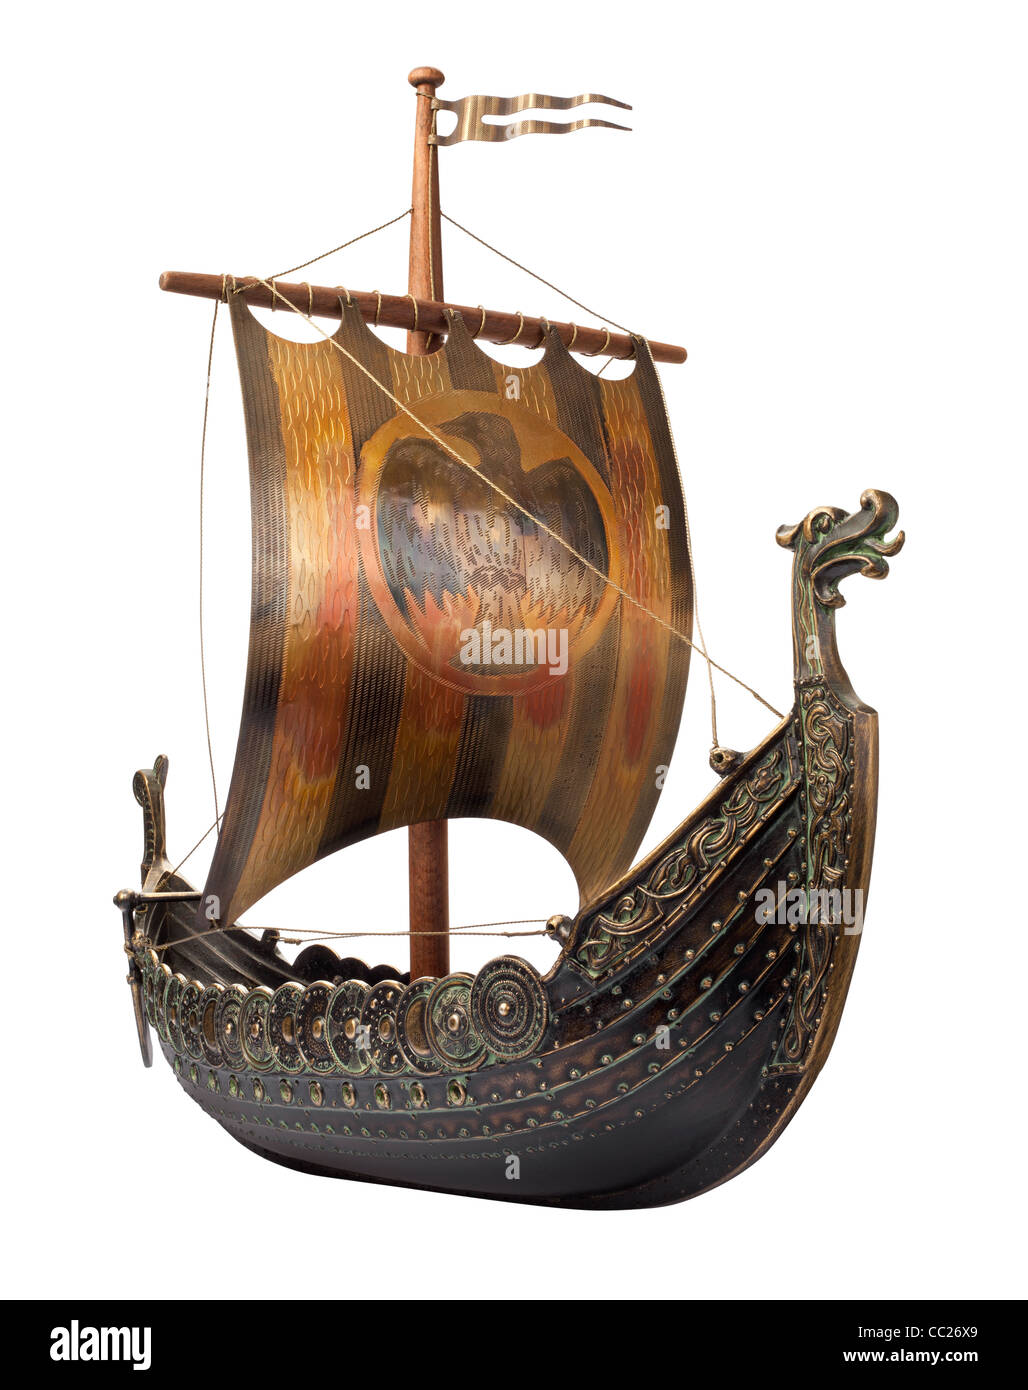 Viking Ship antiques isolated on white Banque D'Images